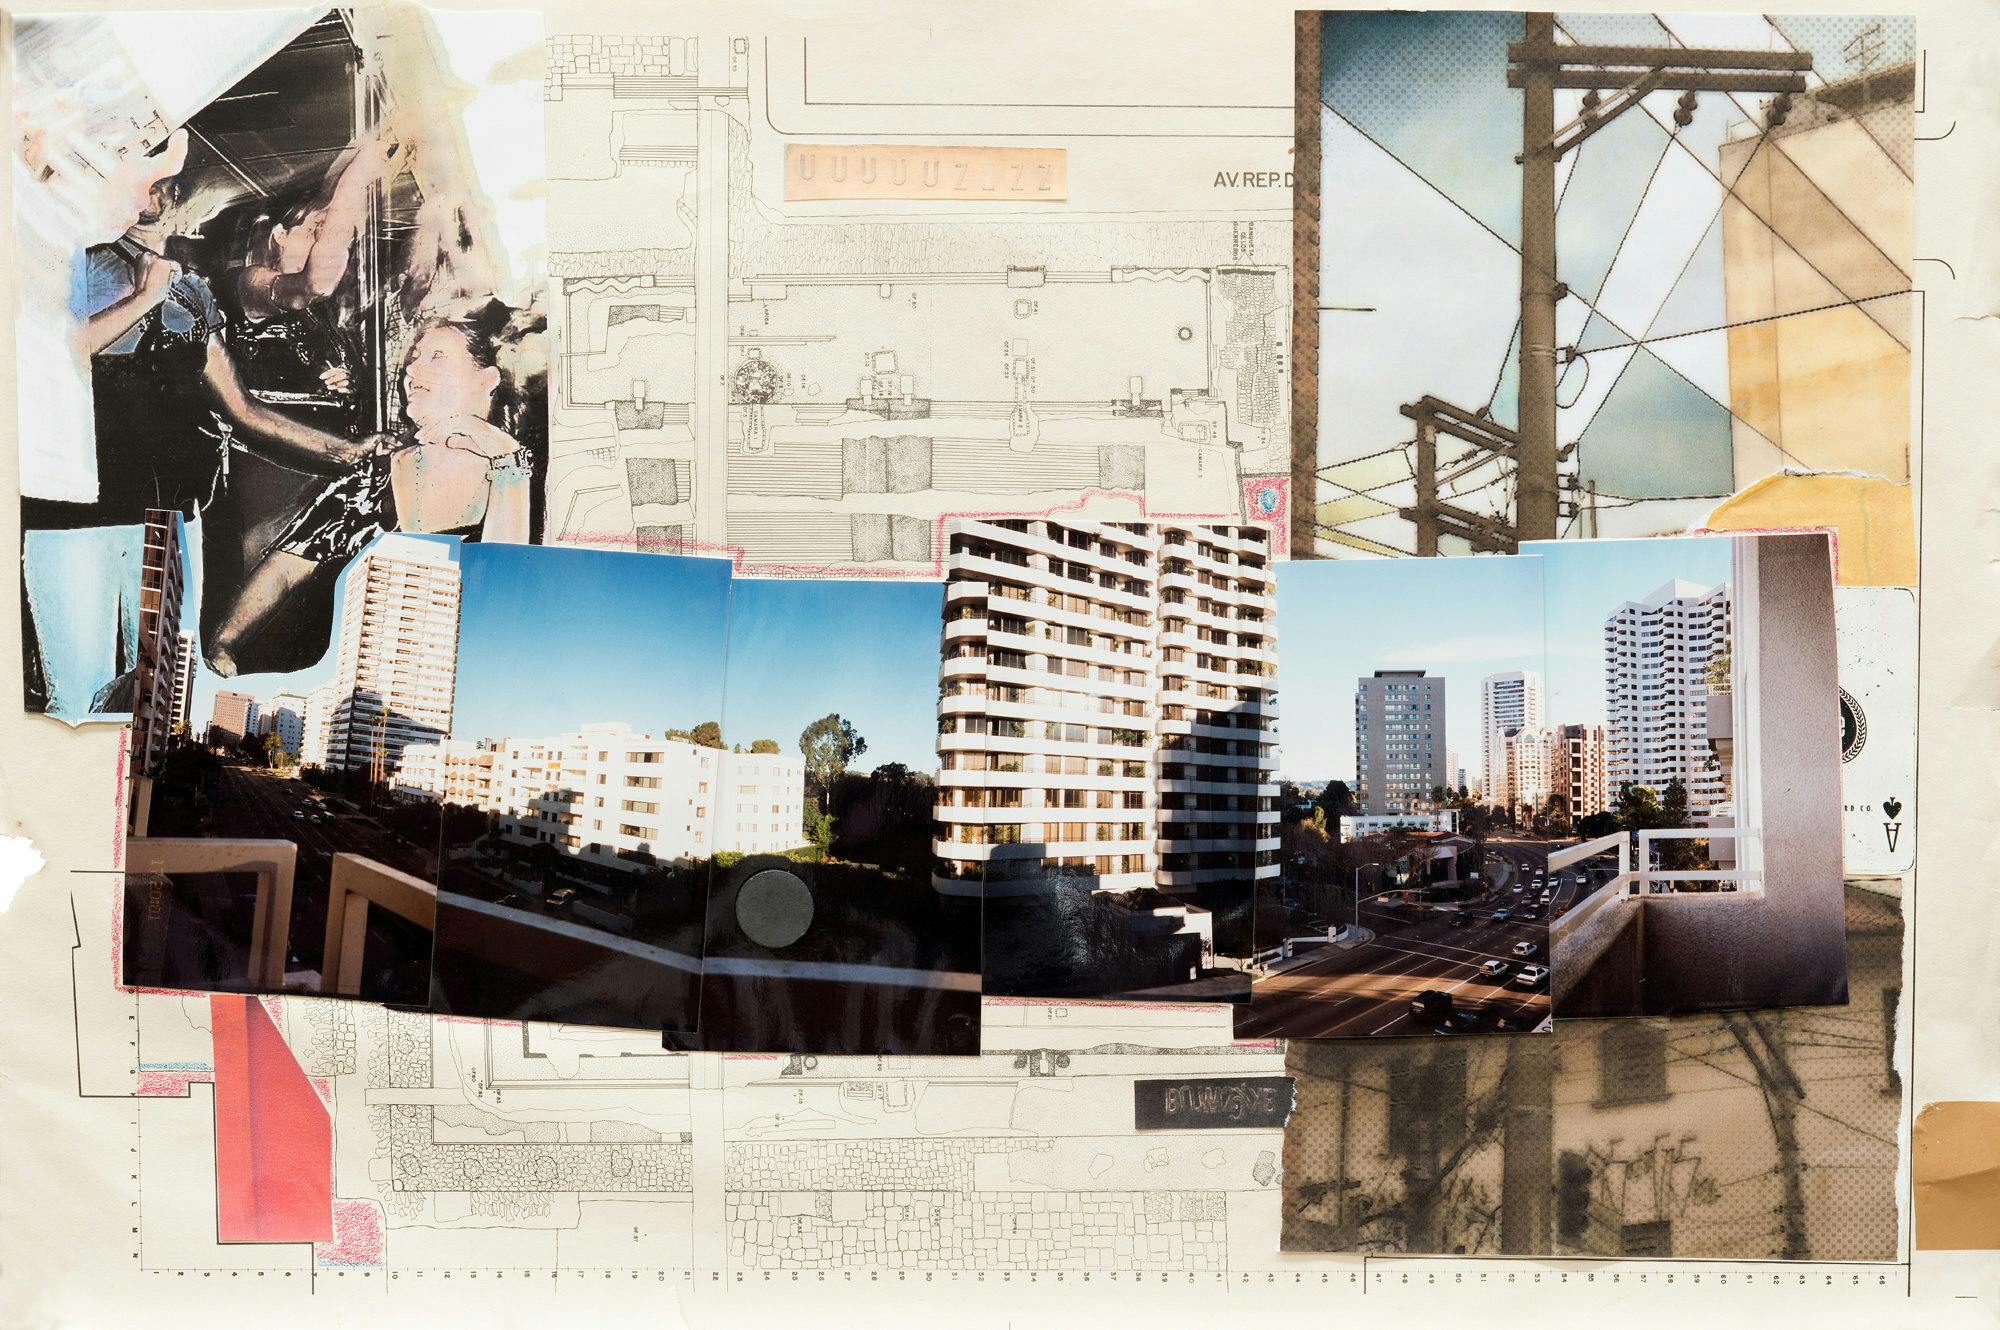 A collage showing fragments of building floor plans and photos of buildings.